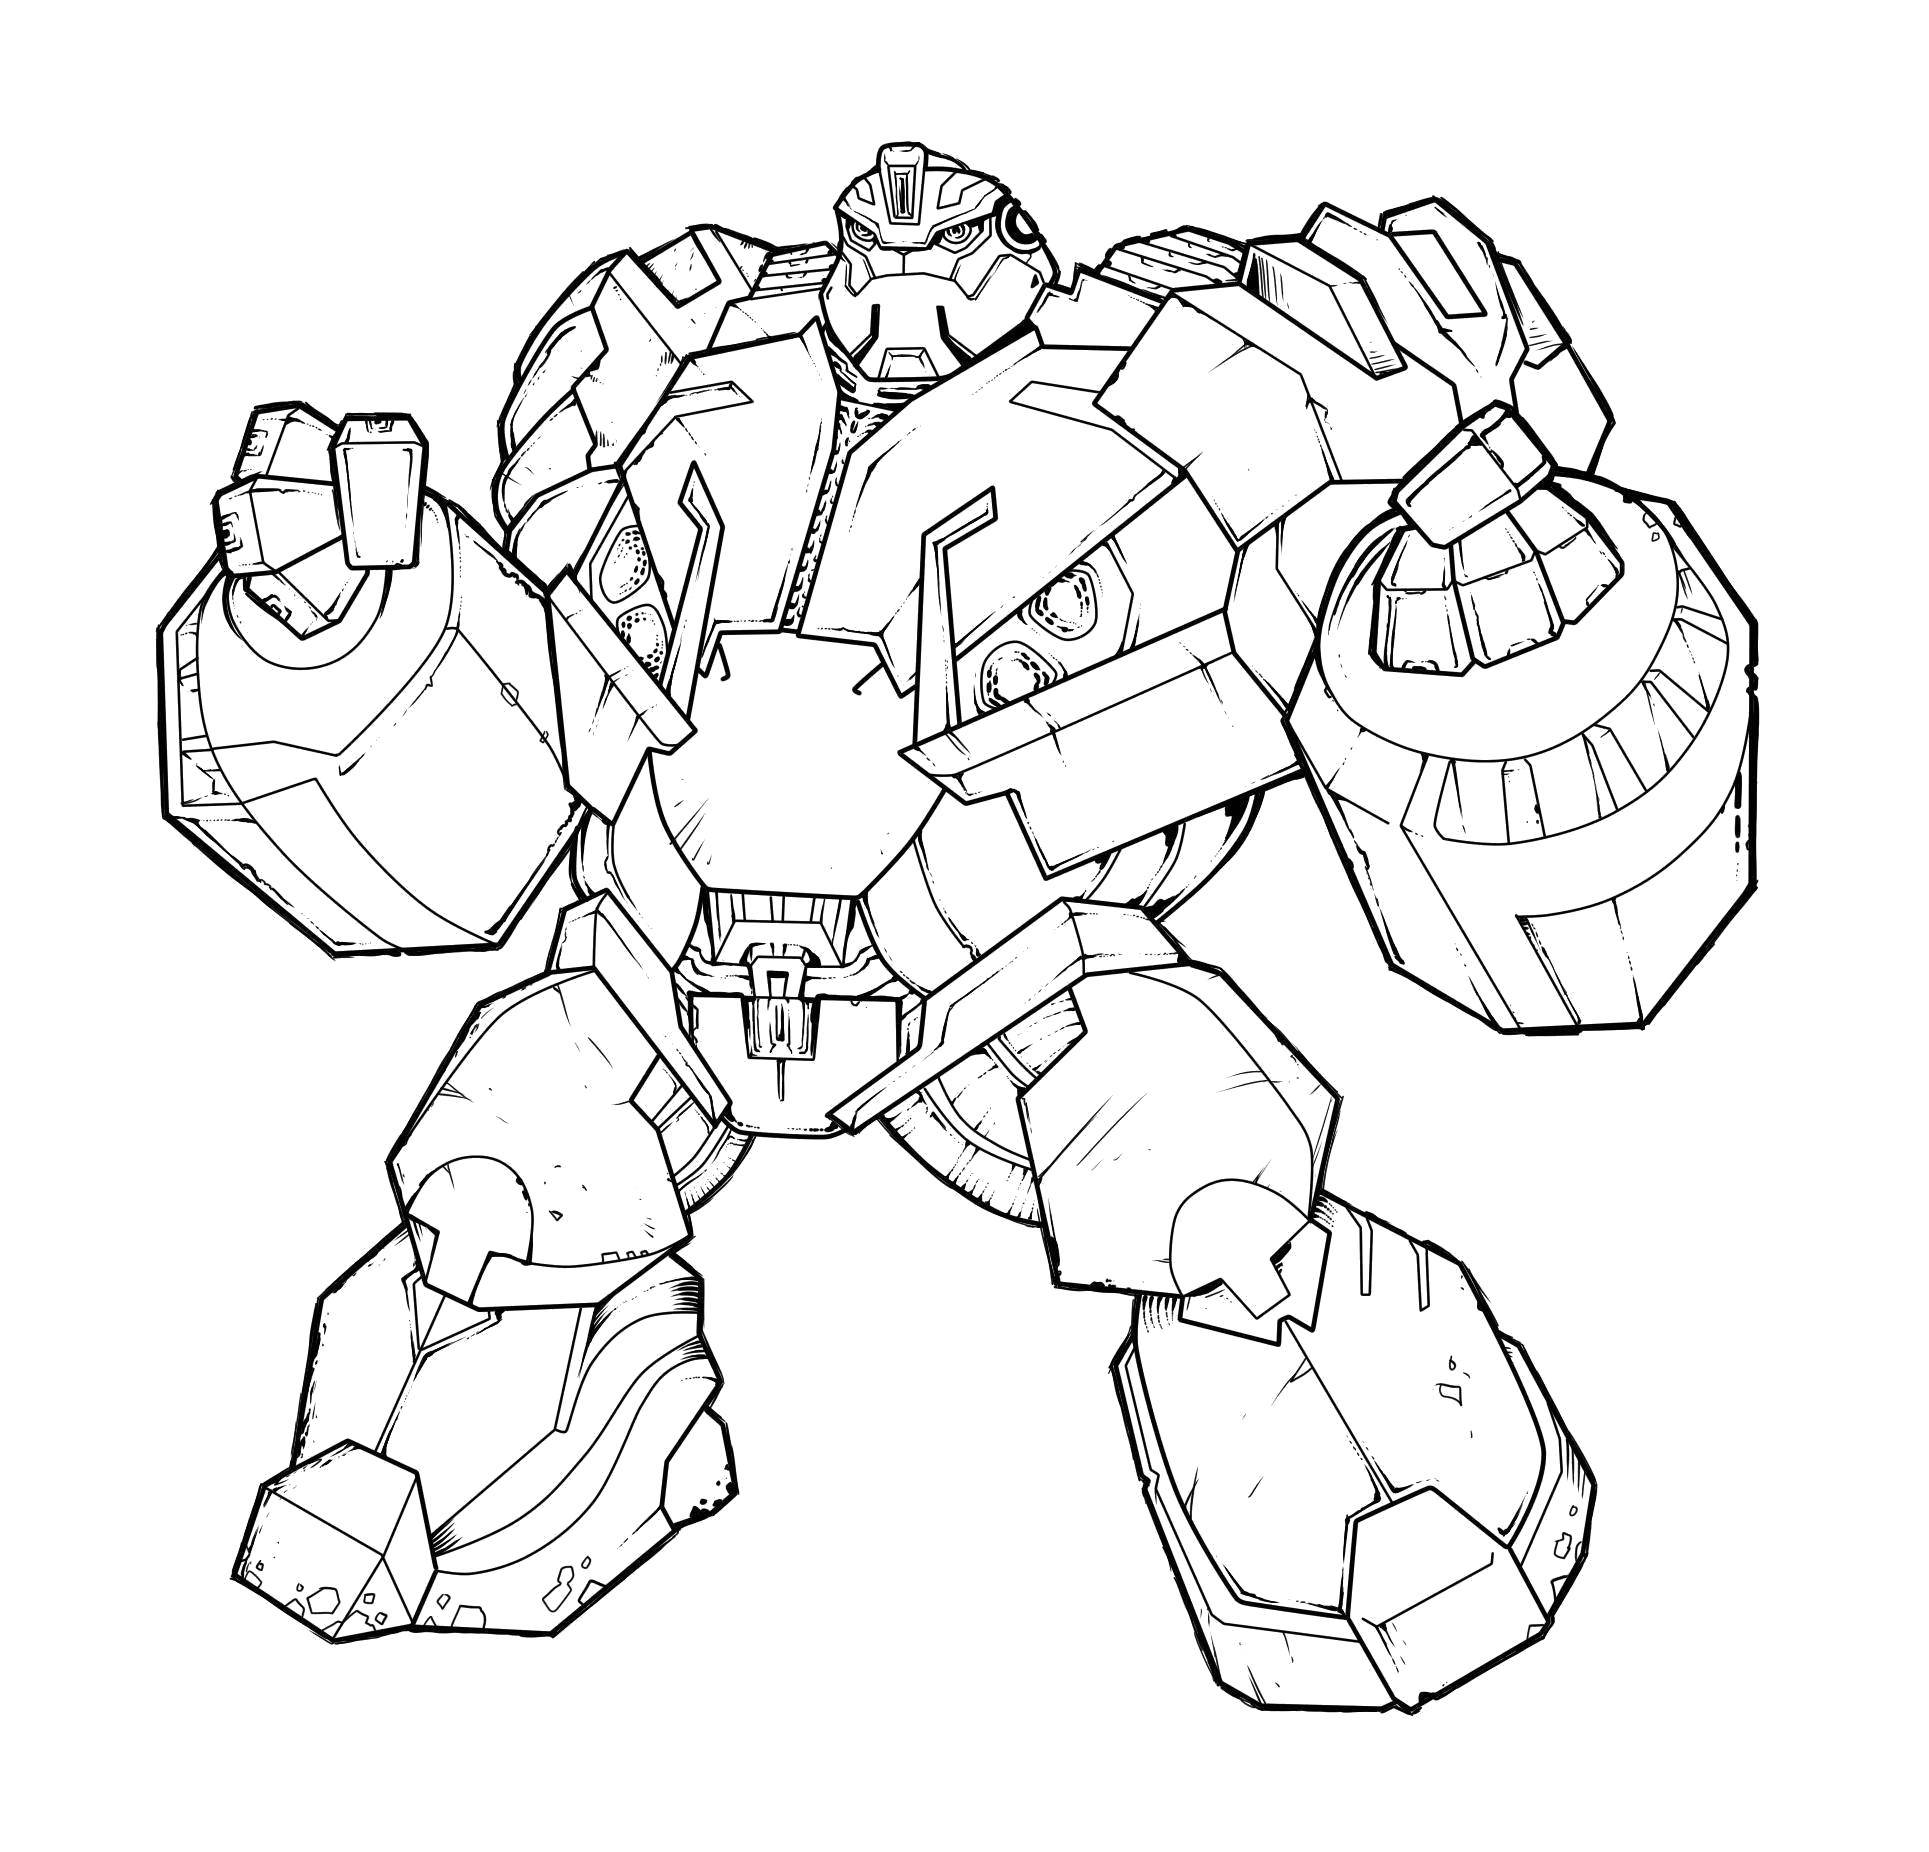 Coloring Transformer. Category transformers. Tags:  Transformers.